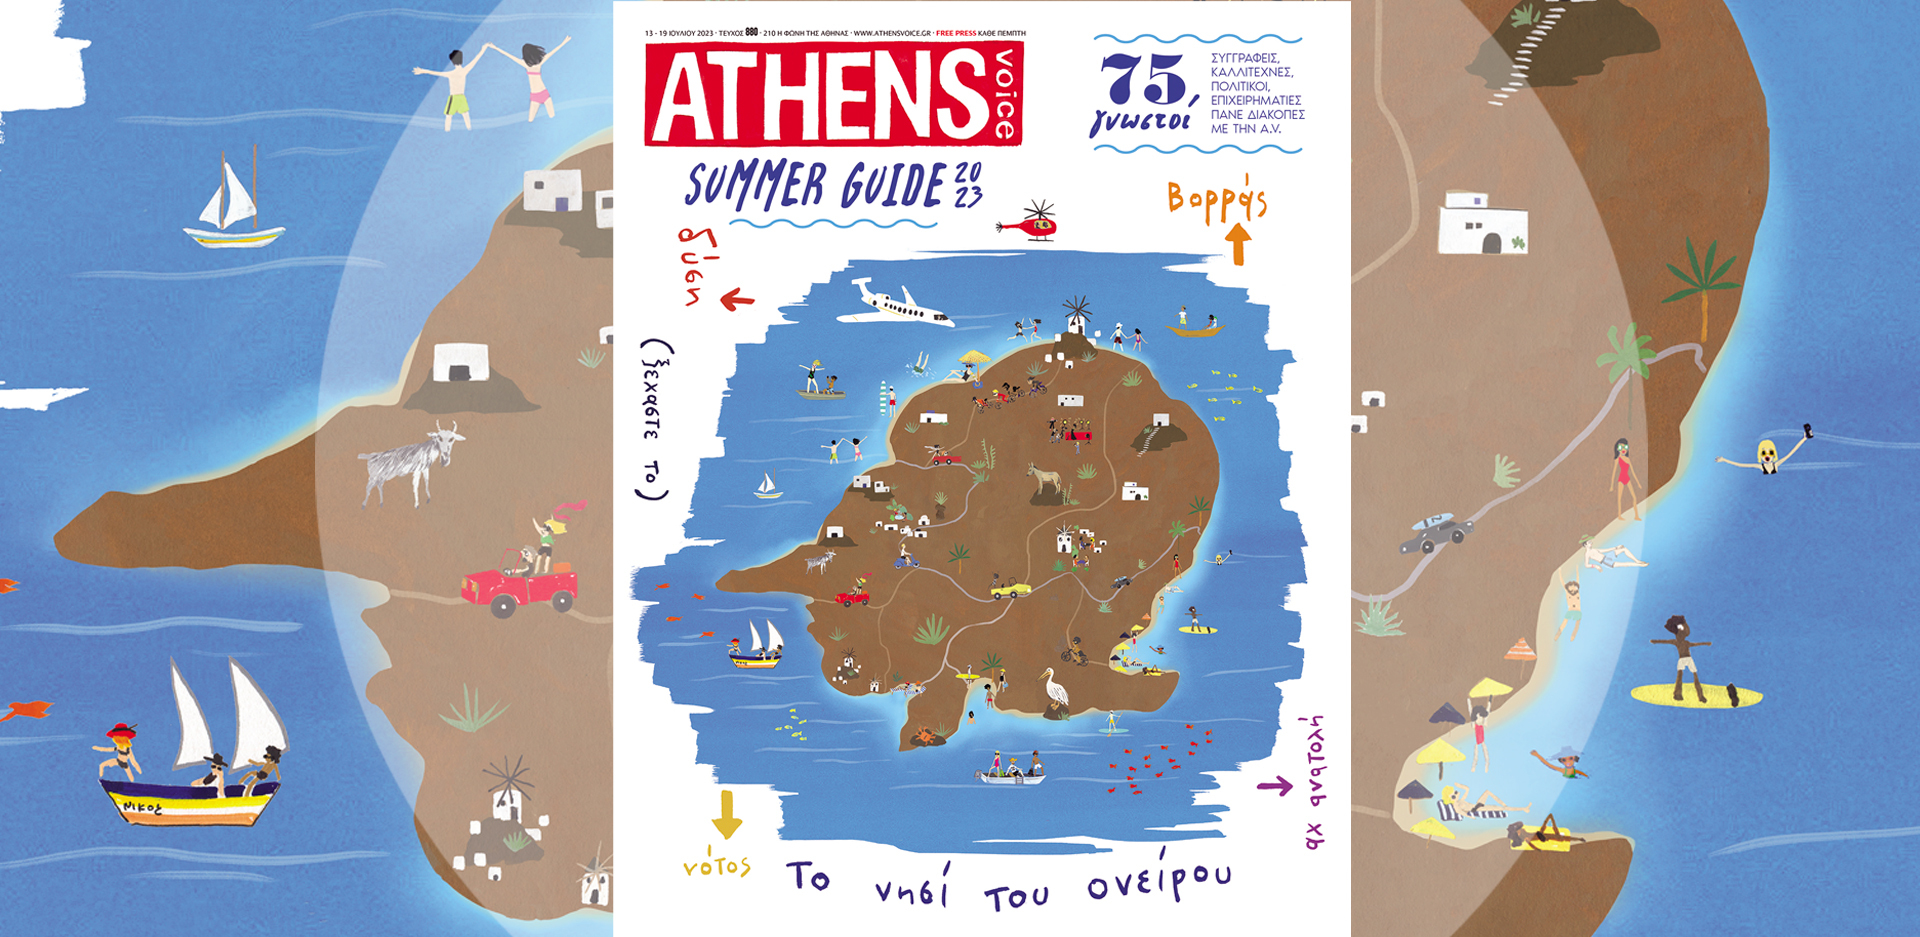 Summer Guide 2023: 75 διάσημοι πάνε διακοπές με την ATHENS VOICE